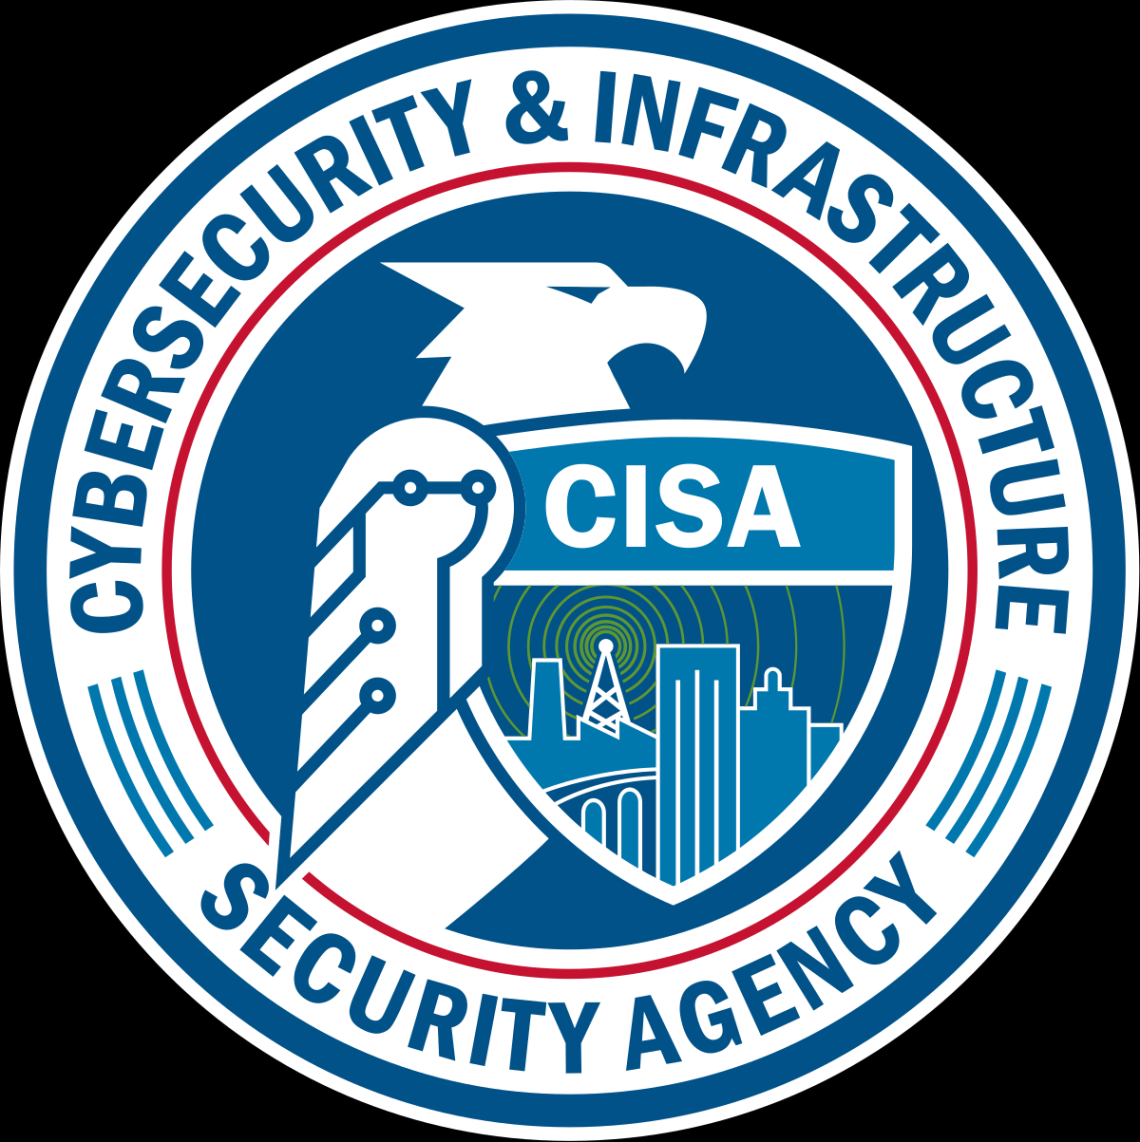 cybersecurity and infrastructure security agency Bulan 1 Cybersecurity and Infrastructure Security Agency - Wikipedia